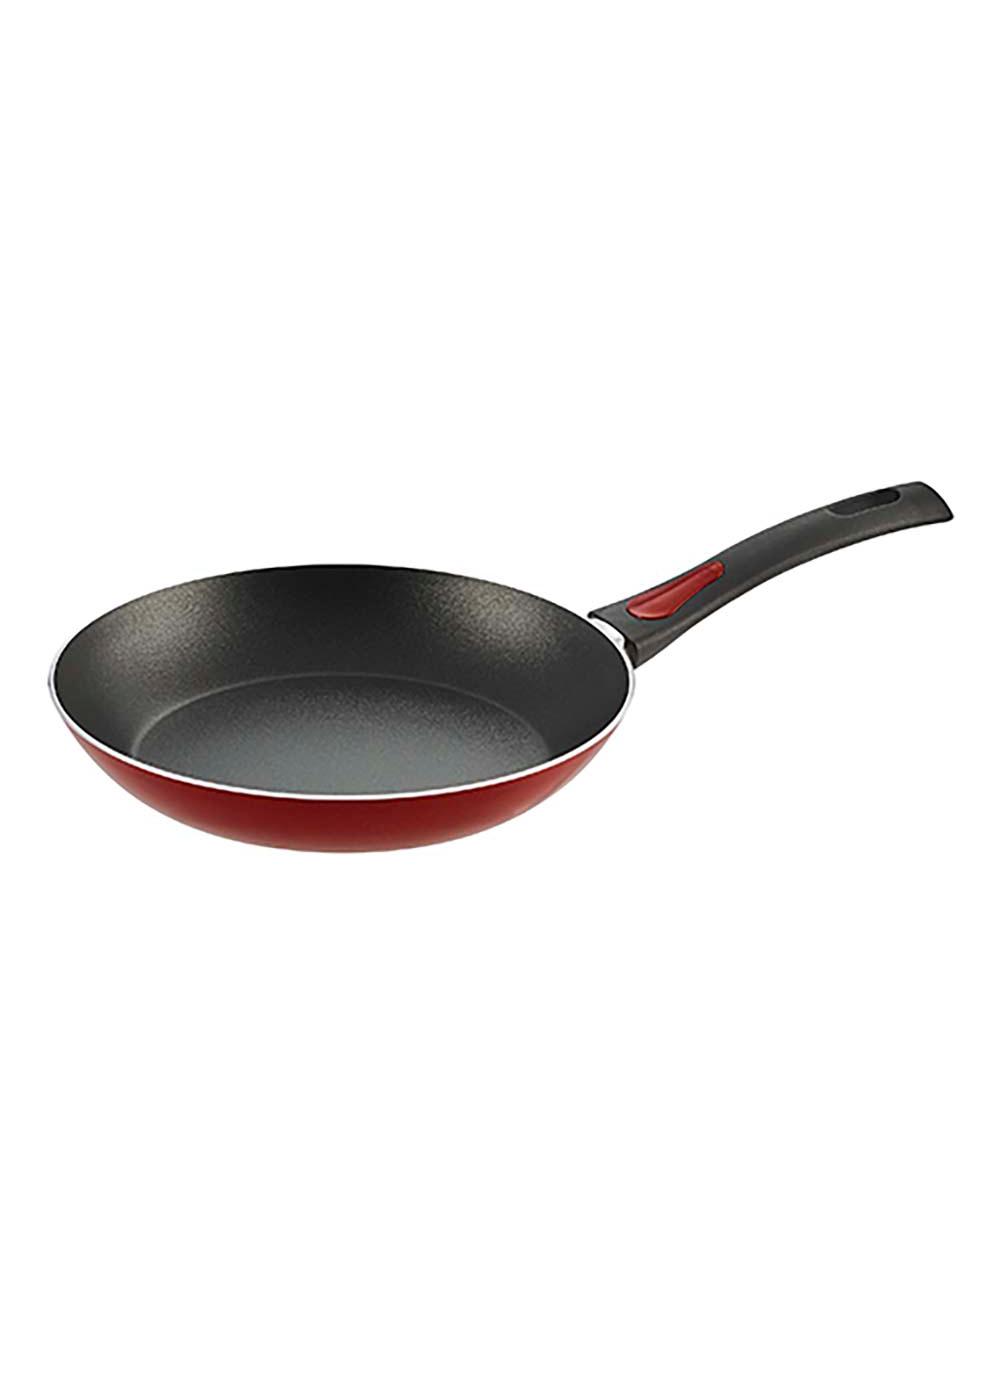 Tramontina Non-Stick Red Cookware Set; image 3 of 14